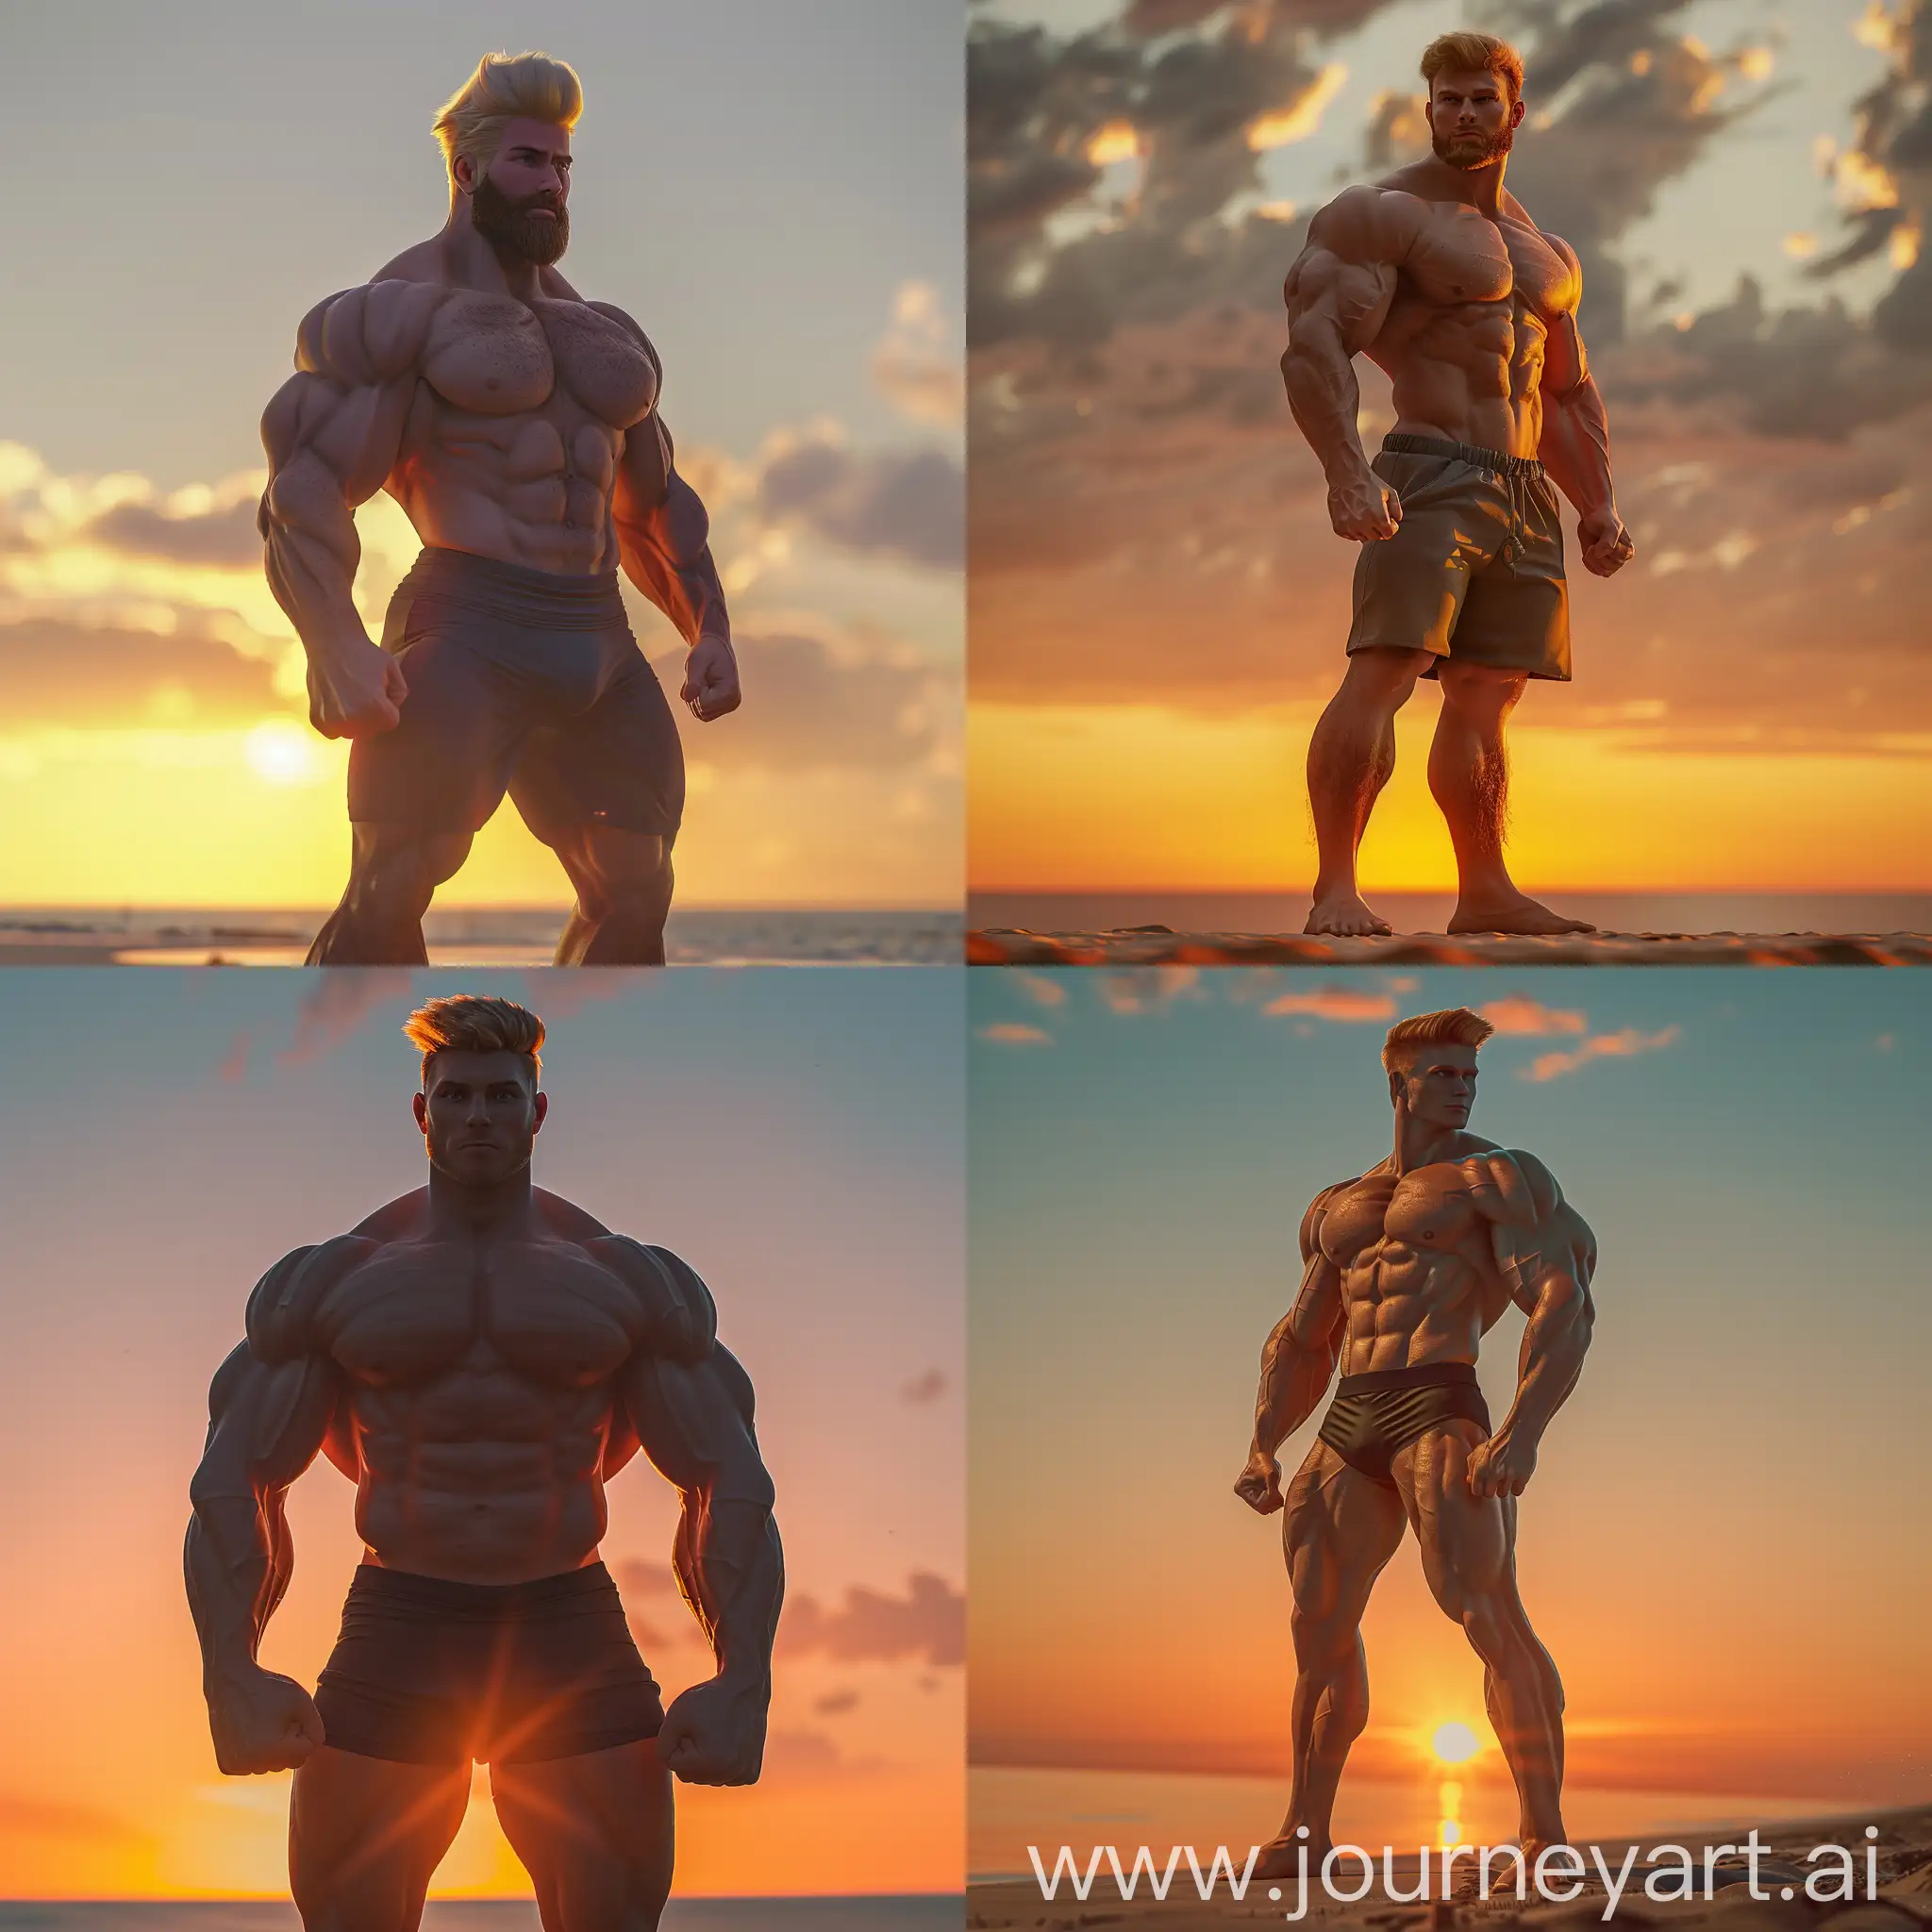 (uhd 8k)) (((SDXL 2.0))) (((Midjourney V6))) (((Cartoon Style))) (((Virile Reality V3.0))) (((fine details ultra masterpiece high quality best image))) (((beach sunset background))) intire wide angle view standing full body (((Handsome))) (((Human Humanoid))) (((Caucasian Blond))) 26 years old  Big Strong Huge Bodybuilder Hunk (((Male/Man))) 